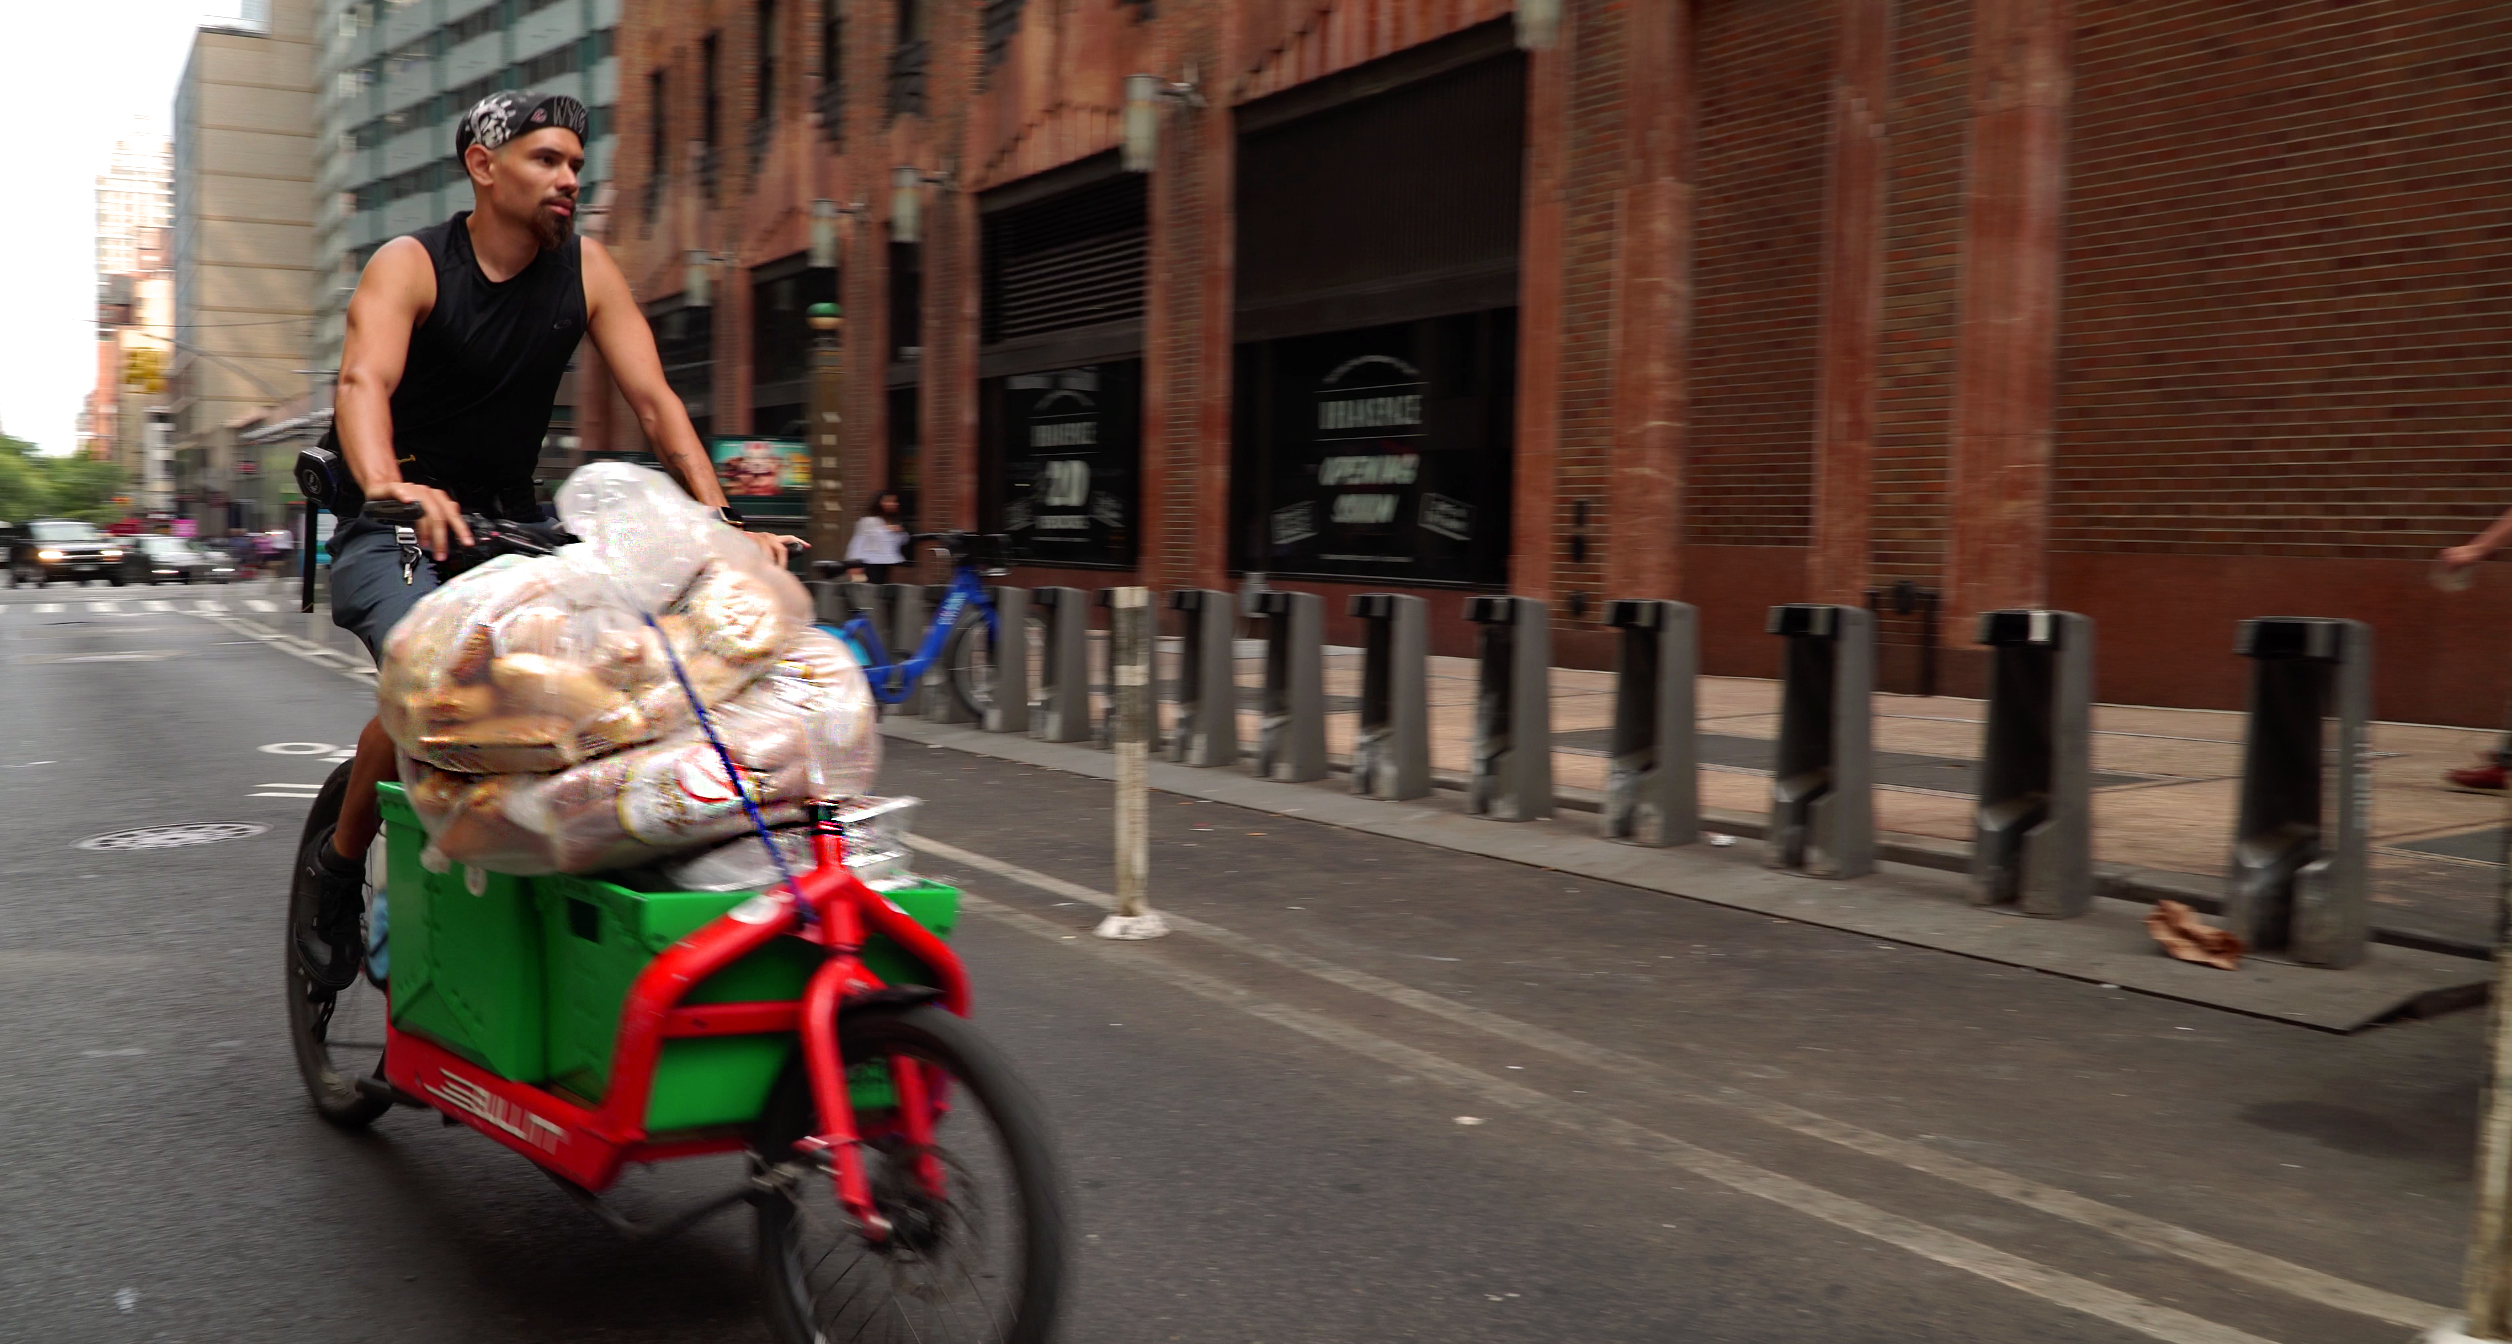 A man on a red bike carrying food in plastic containers.